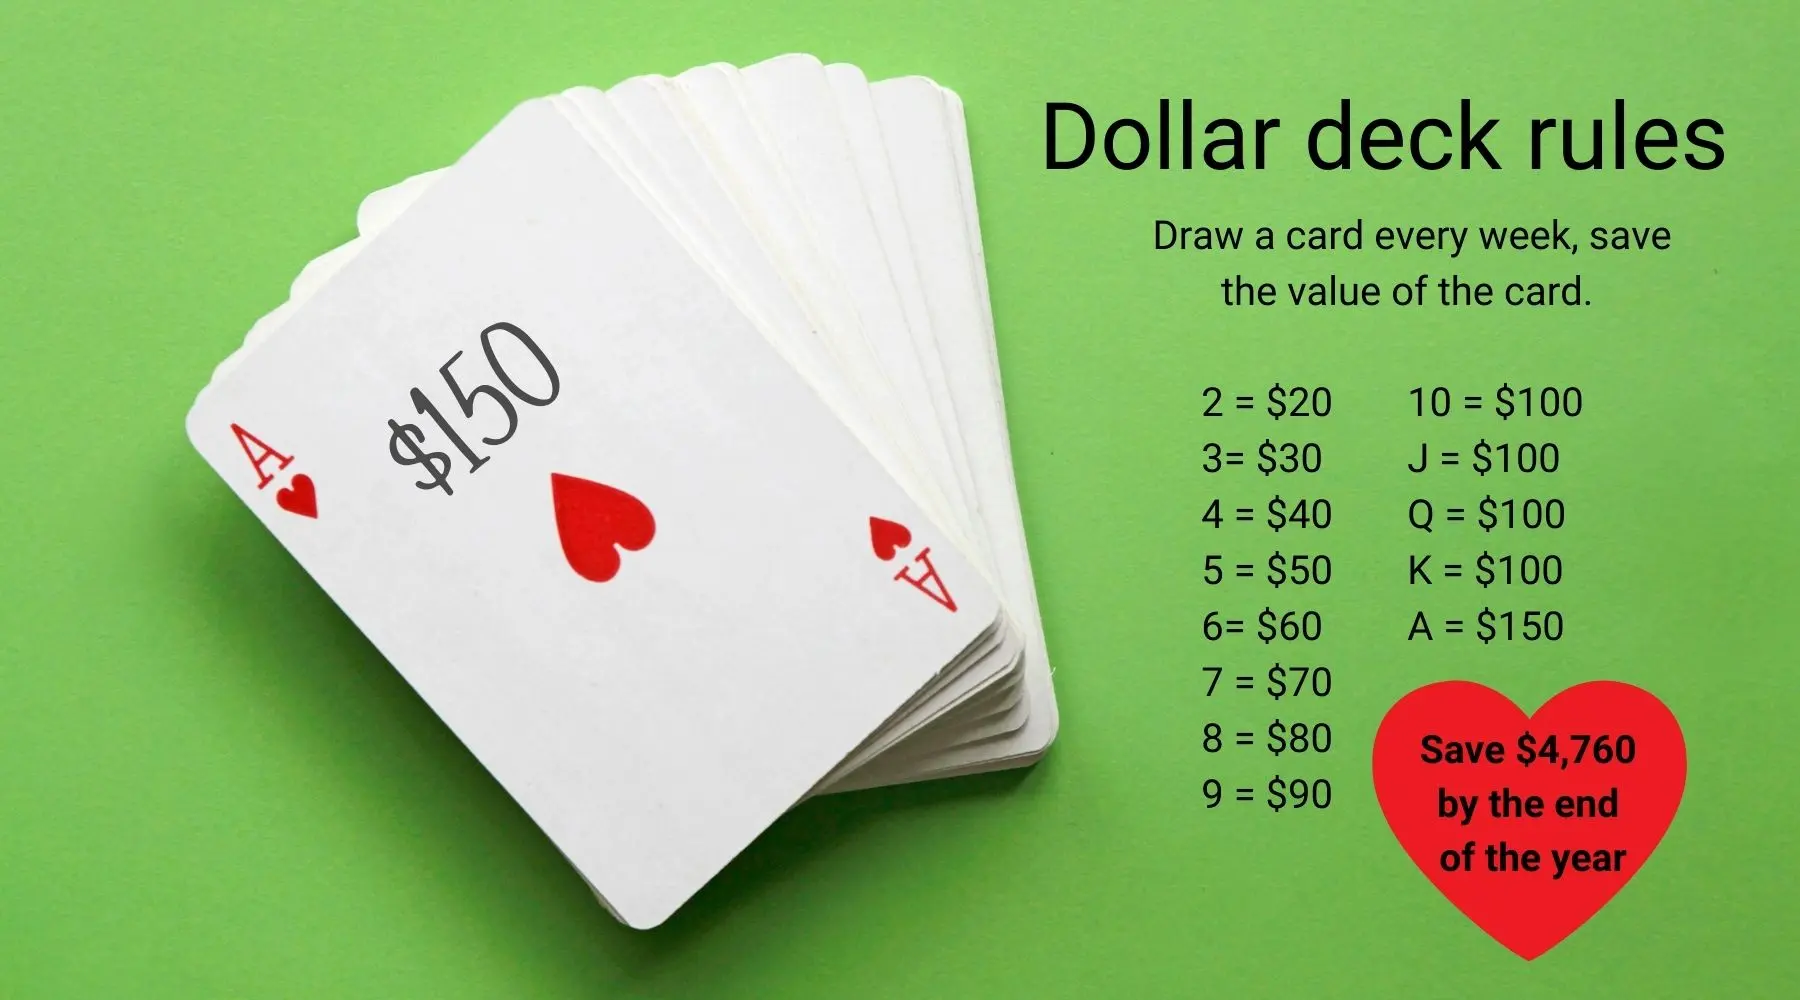 Rules explaining how to play Dollar Deck.